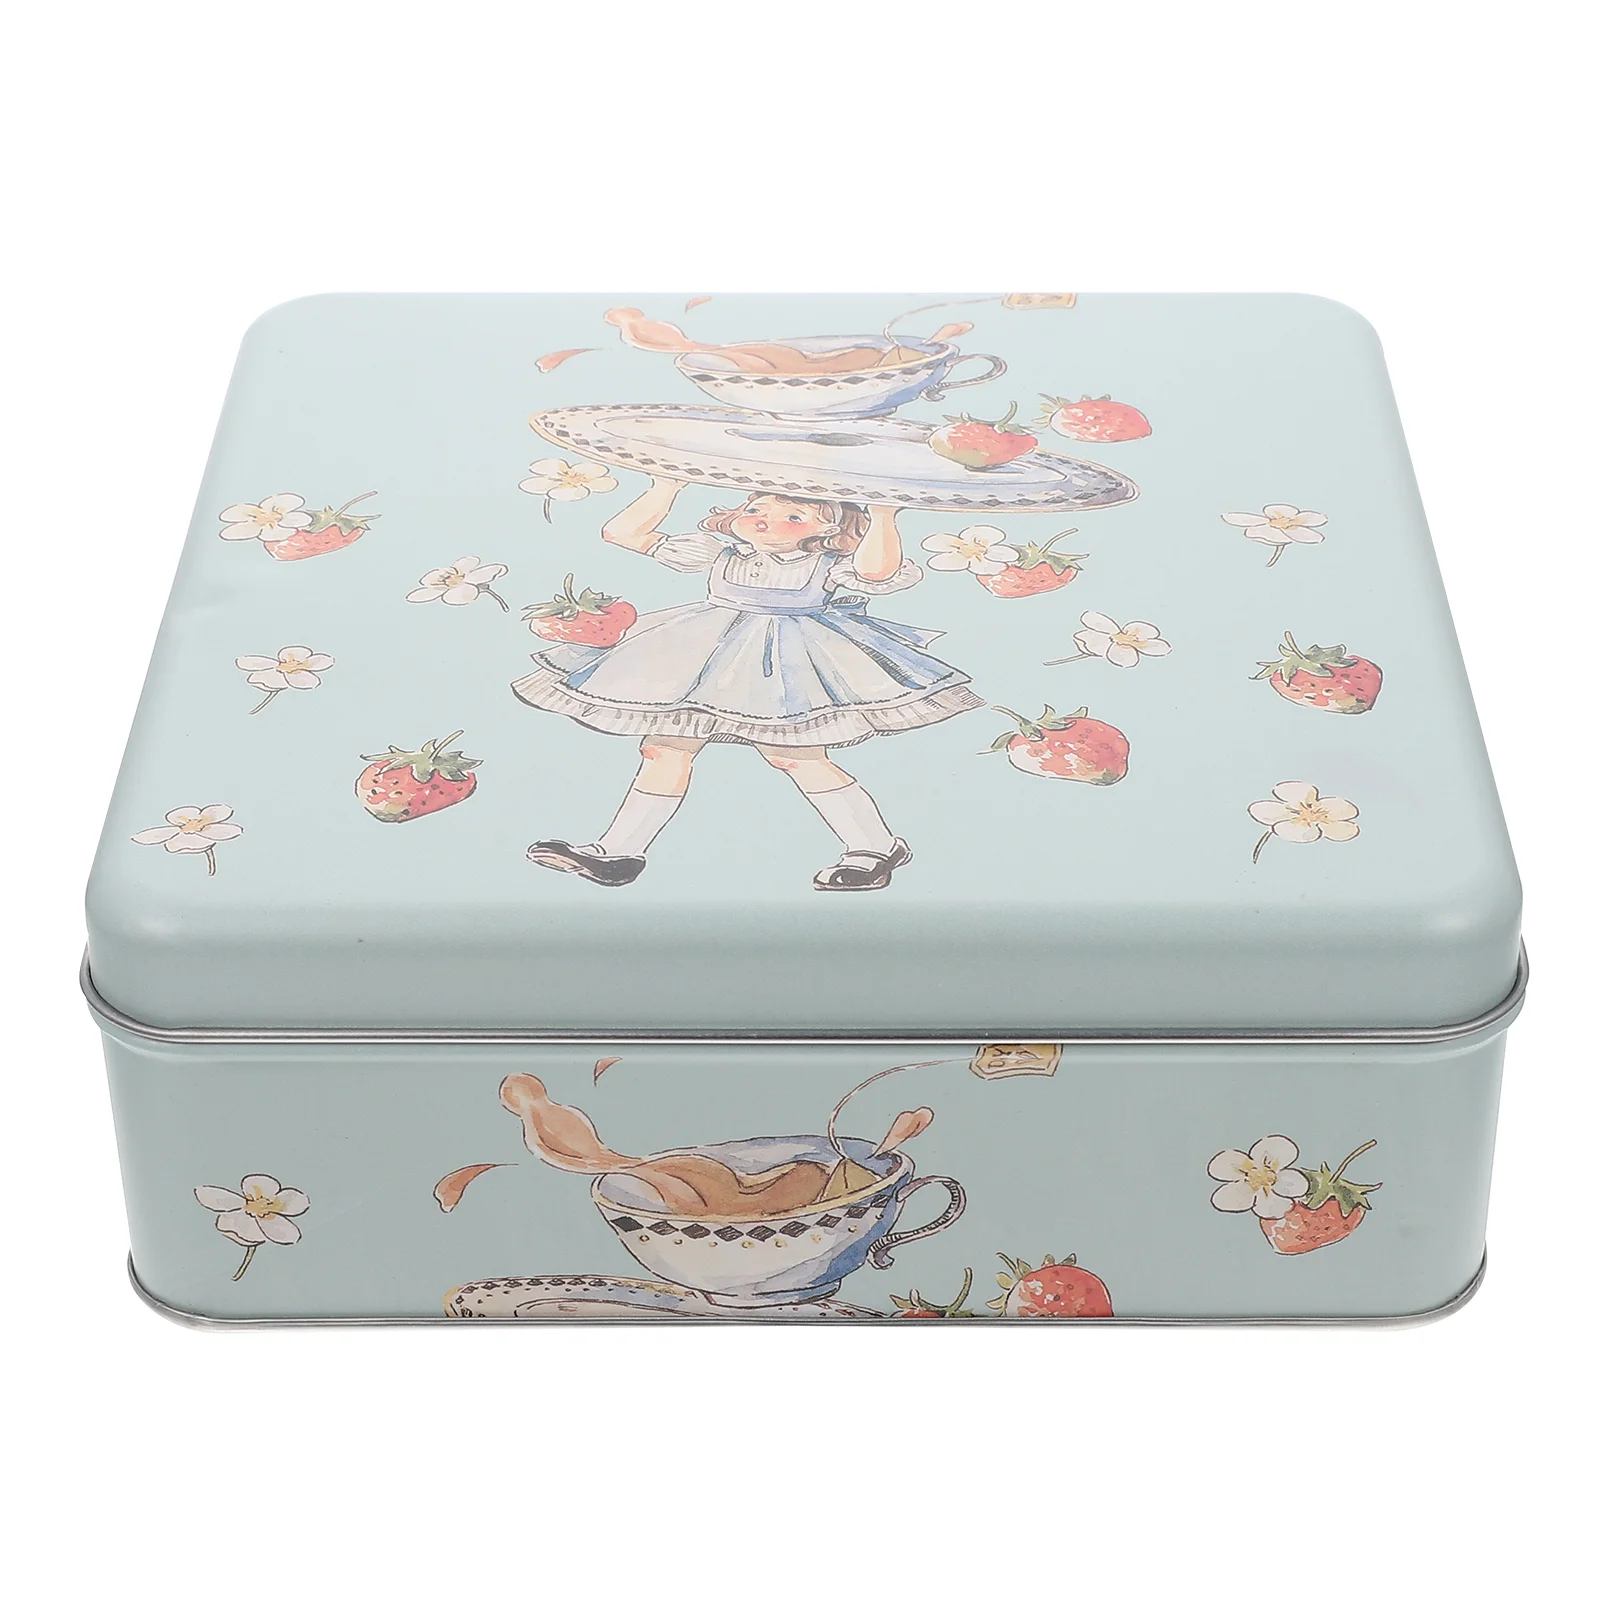 

Biscuit Tin Box Packing Candy Container Jars Storage Holder Sugar Case Sweets Party Favors